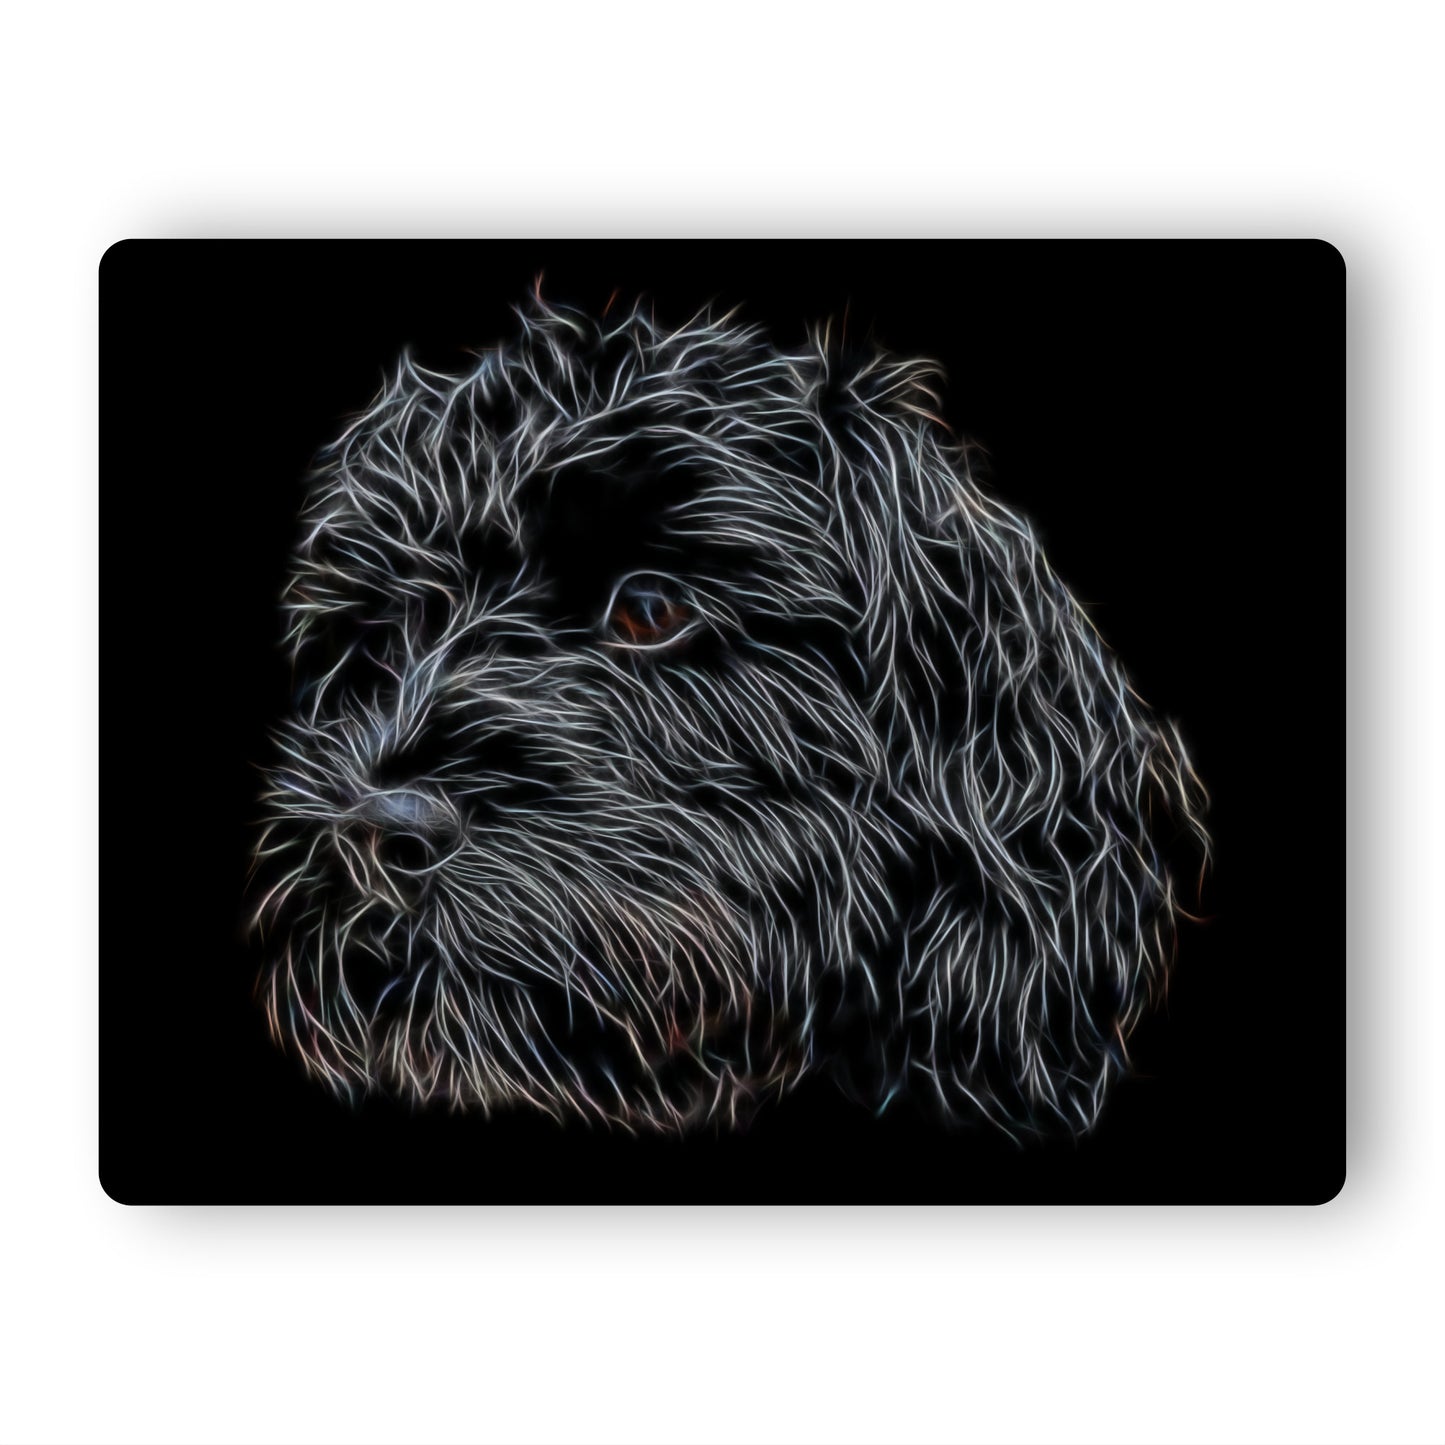 Black Cavapoo Metal Wall Plaque with Stunning Fractal Art Design,  Perfect Cavapoo Owner Gift.